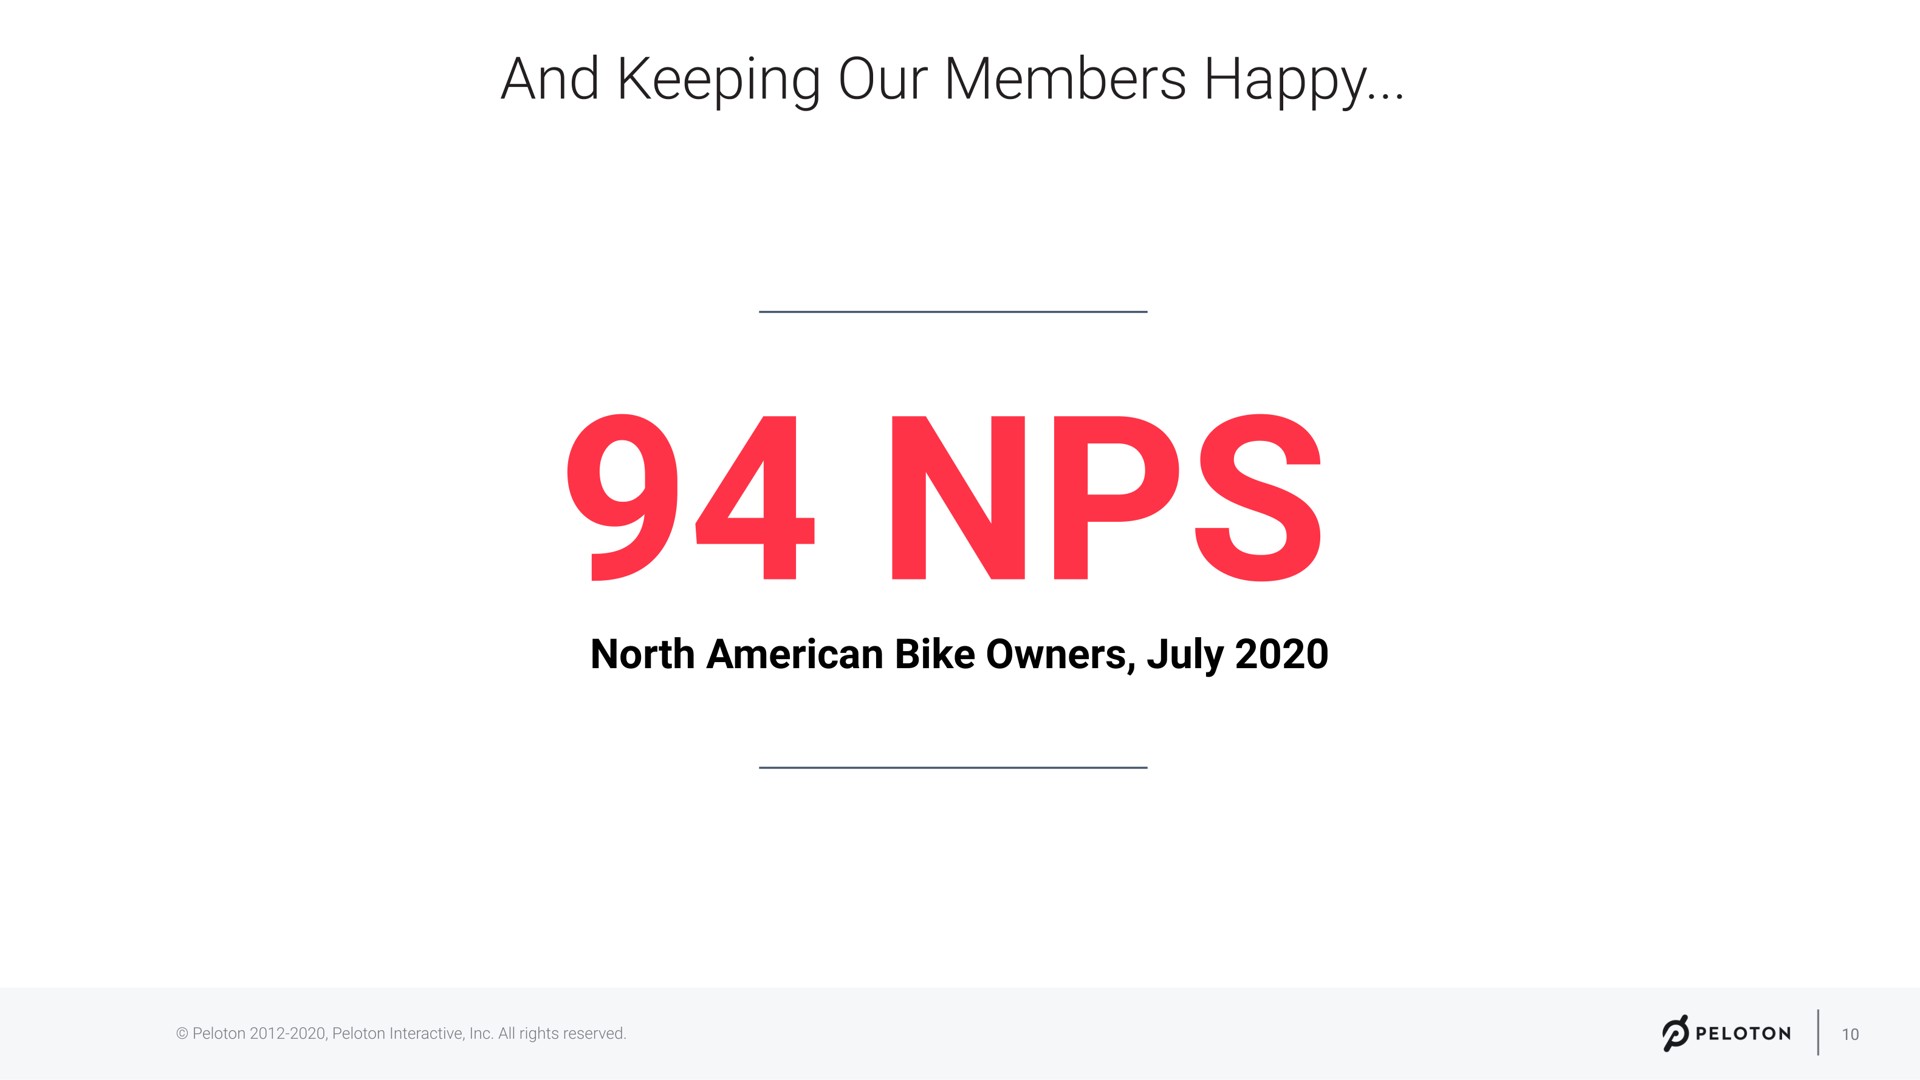 north bike owners and keeping our members happy | Peloton